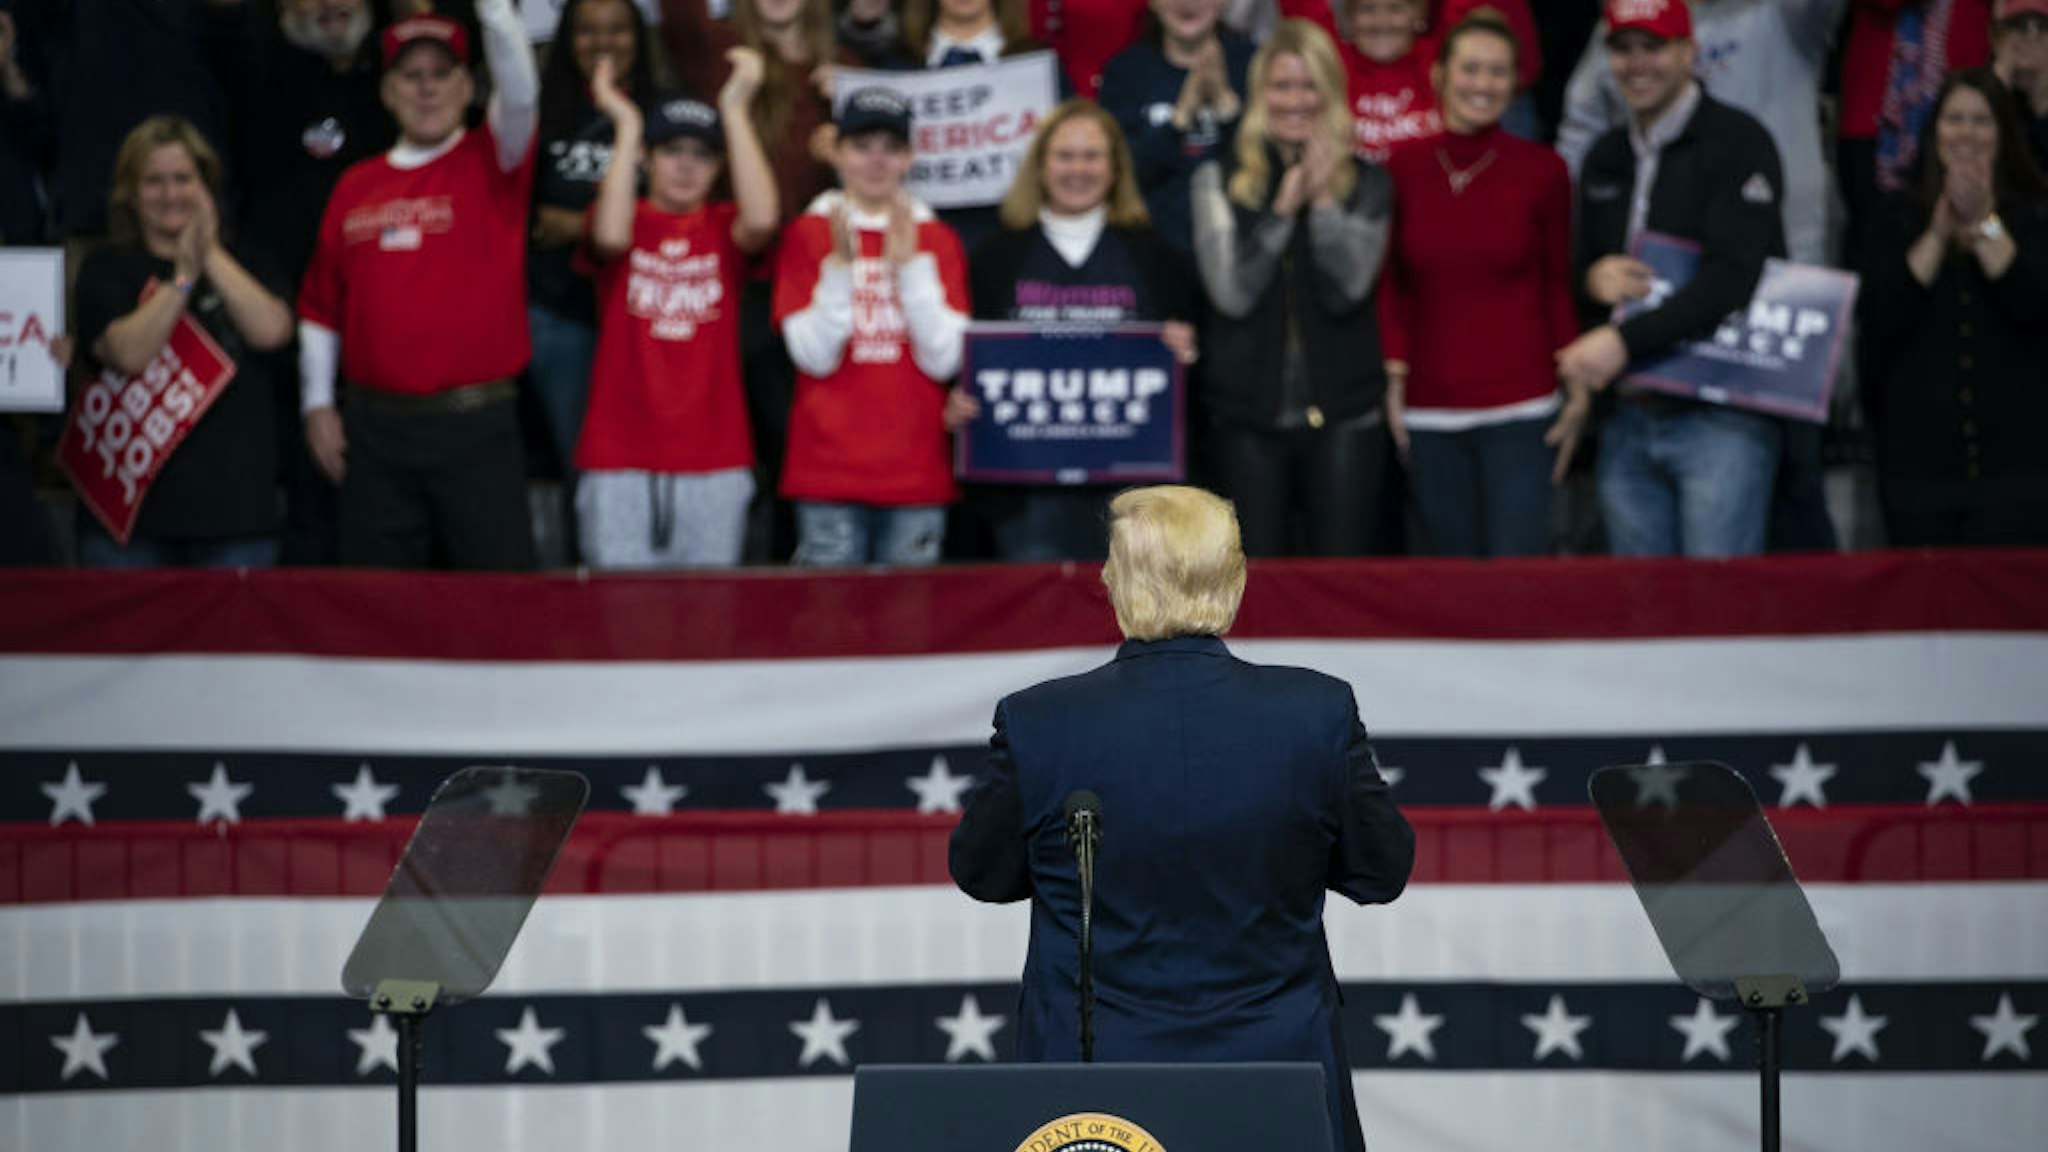 U.S. President Donald Trump speaks during a rally in Des Moines, Iowa, U.S., on Thursday, Jan. 30, 2020. Trump and Democratic presidential hopeful Michael Bloomberg on Thursday unveiled dueling multimillion-dollar campaign ads that are scheduled to air during the Super Bowl on Sunday. Photographer: Al Drago/Bloomberg